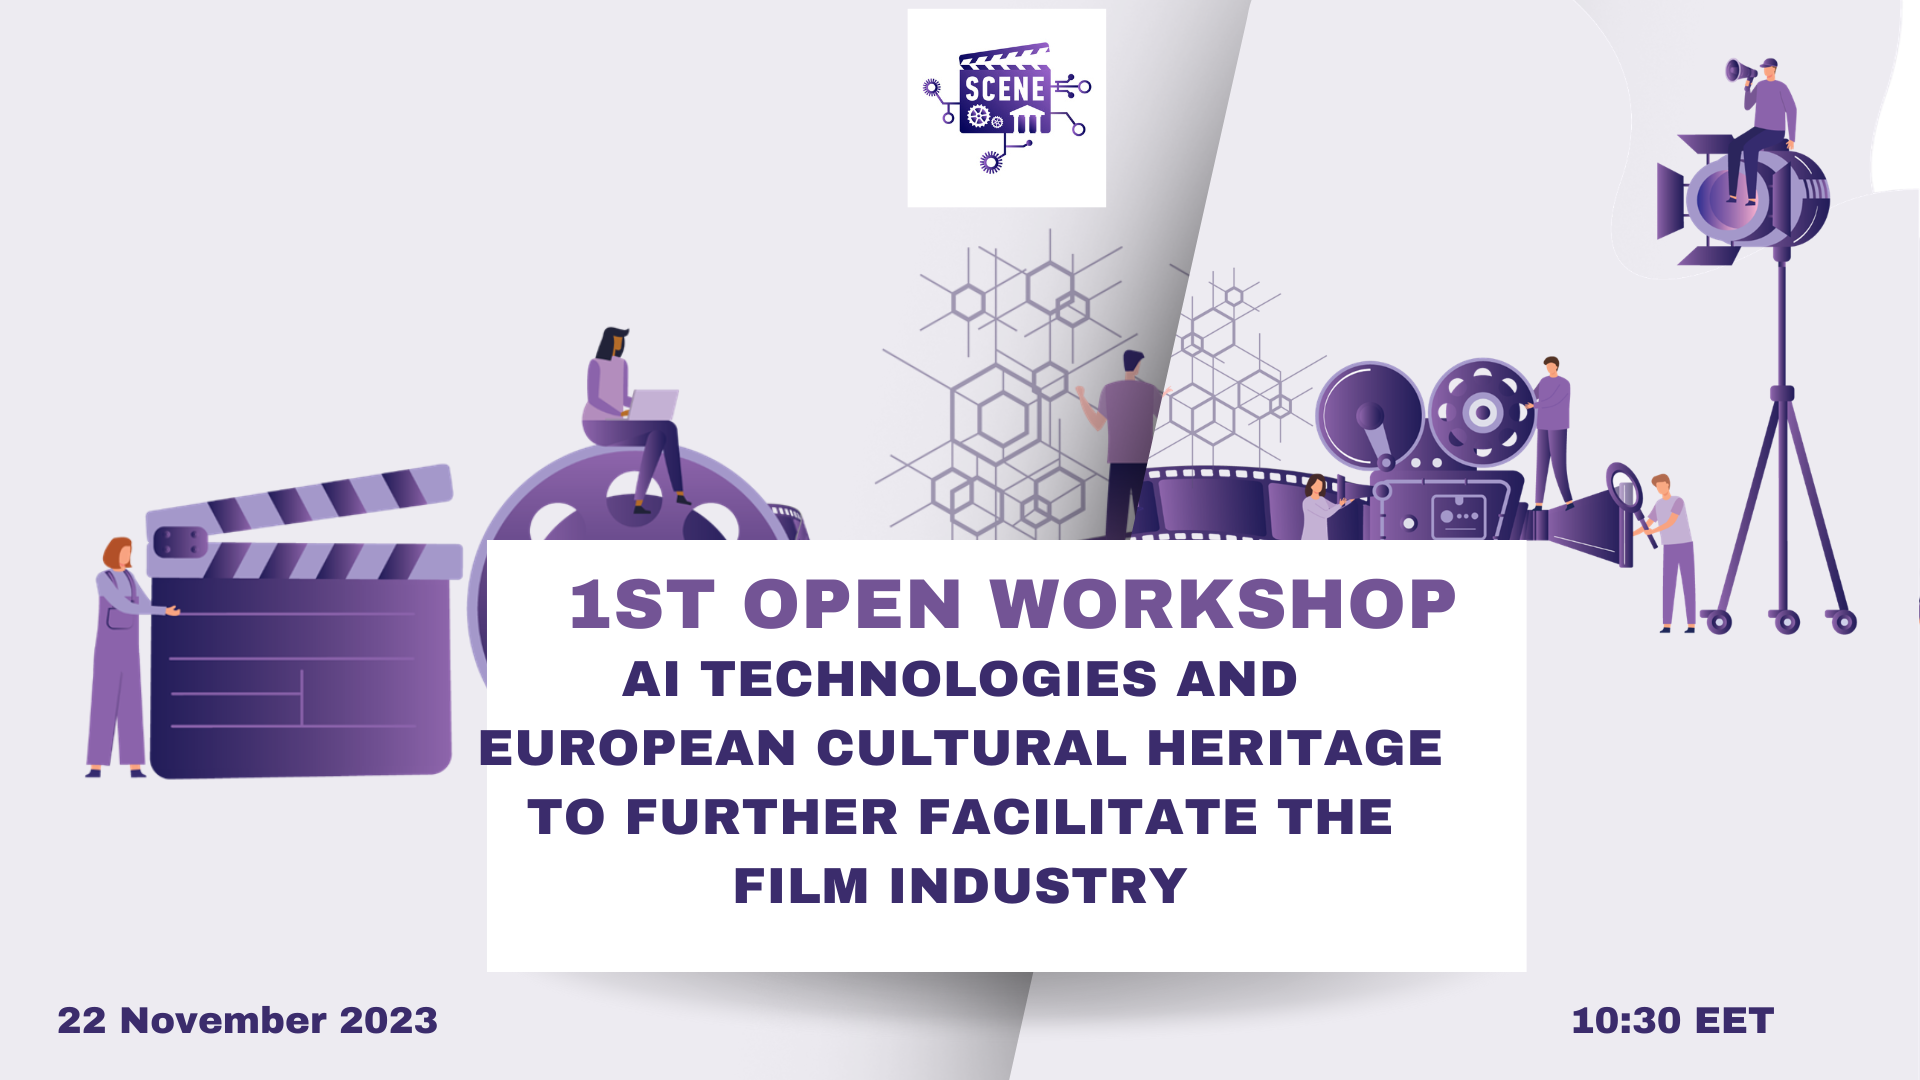  <b>Workshop: AI technologies and European cultural heritage to further facilitate the film industry  </B><span style="COLOR: #0767b3"><br />[Τρίτη, 21 Νοεμβρίου 2023]</span>